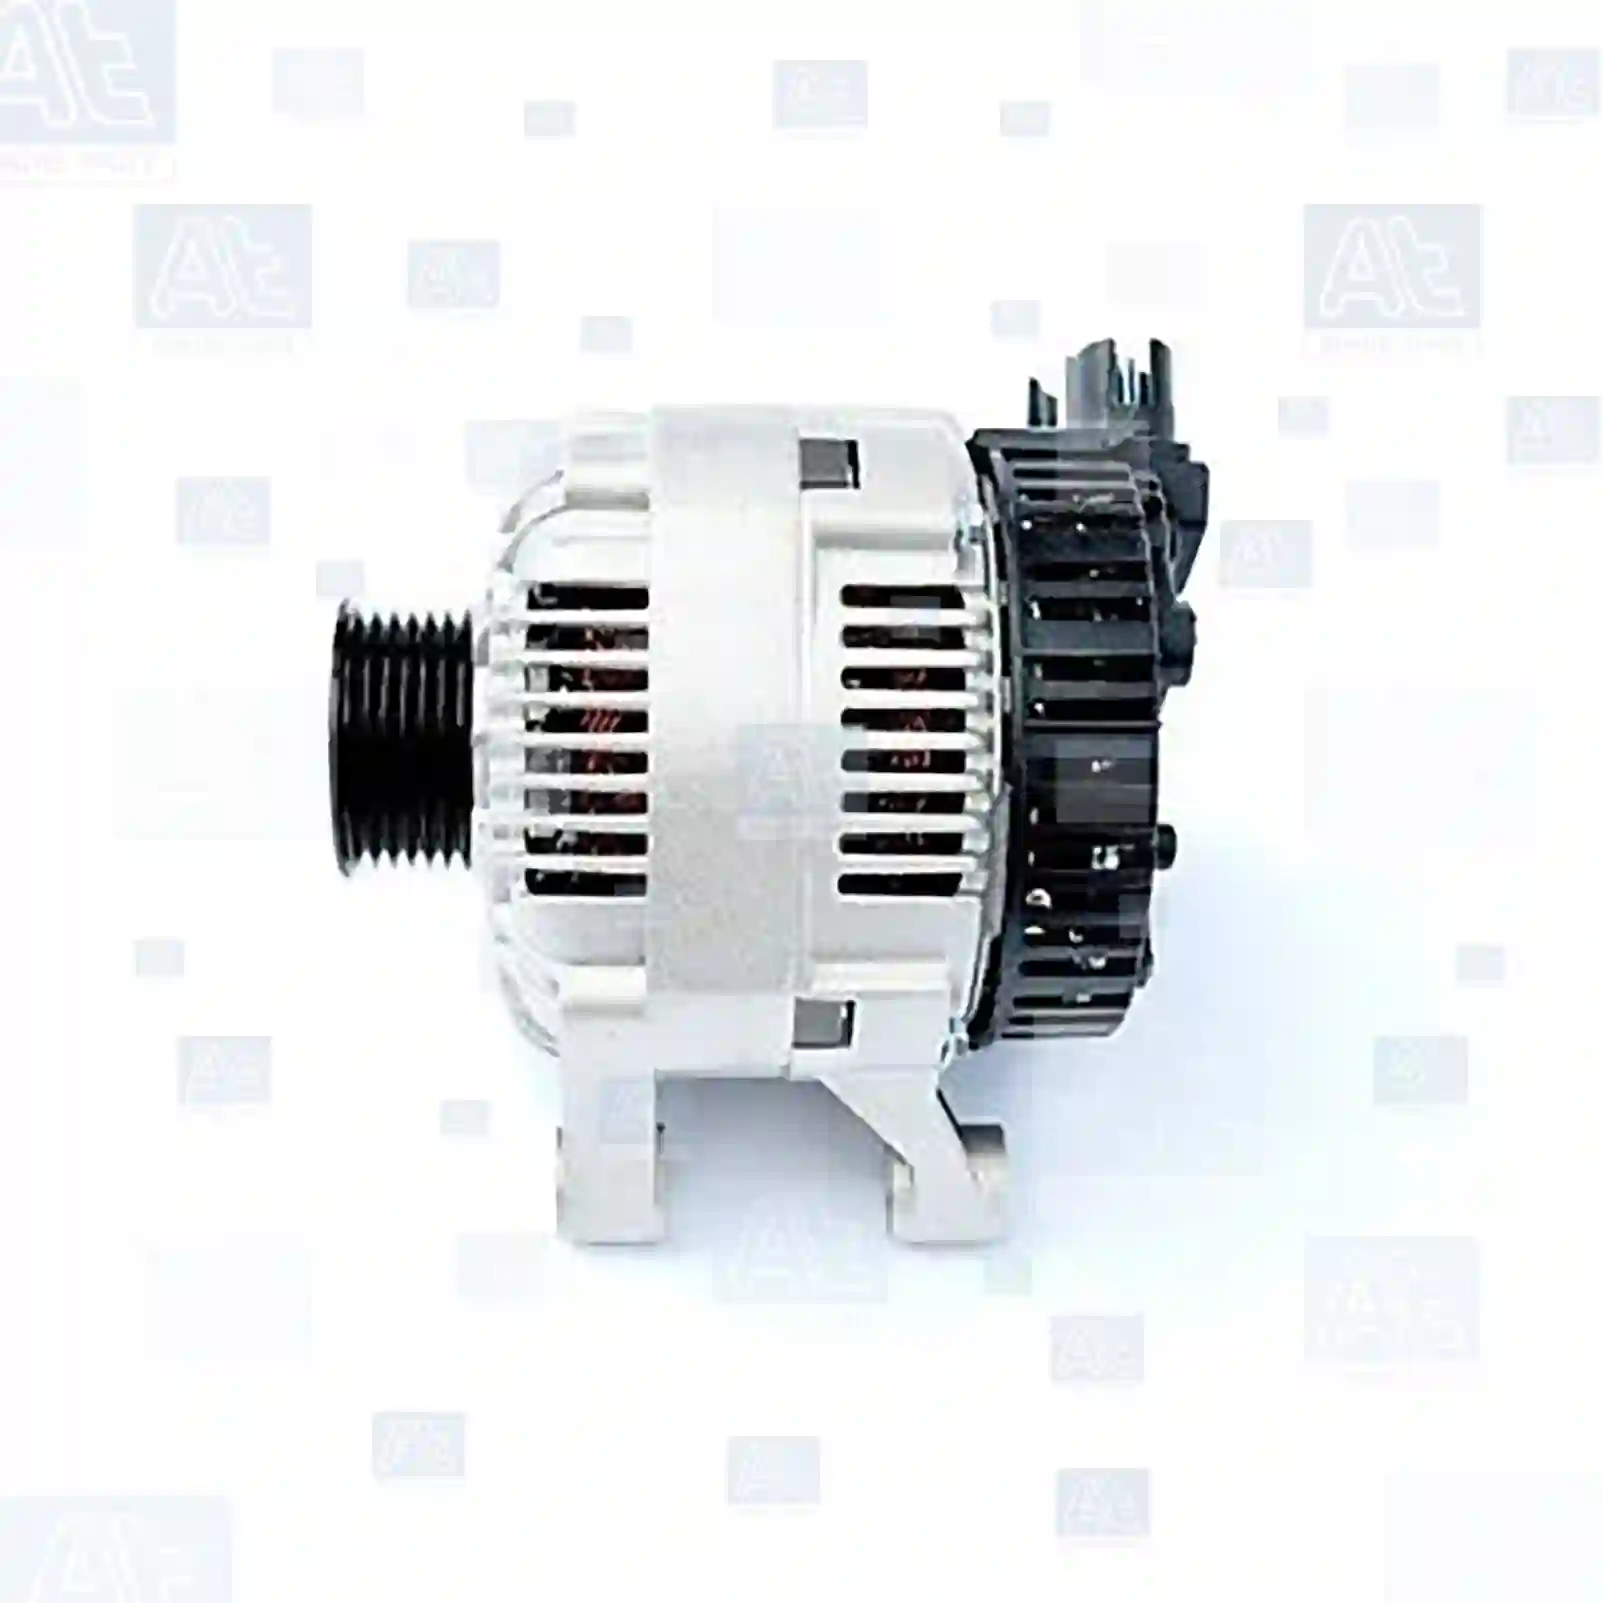 Alternator, 77710017, 57052A, 57052B, 57052C, 57054R, 57054U, 57054W, 57054X, 5705FX, 9622410580, 9623727180, 9623727280, 9623727380, 9623727880, 9635772780, 9635772880, 9642880480, 71716609, 71718905, 71716608, 71716609, 71718905, 9621791680, 9622410580, 9623727380, 9623727880, 9635772880, 9642880480, 71716609, 71718905, 9622410580, SA178, 57052A, 57052B, 57052C, 57054R, 57054U, 57054W, 57054X, 5705FX, 9622410580, 9623727180, 9623727280, 9623727380, 9623727880, 9635772780, 9635772880, 9642880480 ||  77710017 At Spare Part | Engine, Accelerator Pedal, Camshaft, Connecting Rod, Crankcase, Crankshaft, Cylinder Head, Engine Suspension Mountings, Exhaust Manifold, Exhaust Gas Recirculation, Filter Kits, Flywheel Housing, General Overhaul Kits, Engine, Intake Manifold, Oil Cleaner, Oil Cooler, Oil Filter, Oil Pump, Oil Sump, Piston & Liner, Sensor & Switch, Timing Case, Turbocharger, Cooling System, Belt Tensioner, Coolant Filter, Coolant Pipe, Corrosion Prevention Agent, Drive, Expansion Tank, Fan, Intercooler, Monitors & Gauges, Radiator, Thermostat, V-Belt / Timing belt, Water Pump, Fuel System, Electronical Injector Unit, Feed Pump, Fuel Filter, cpl., Fuel Gauge Sender,  Fuel Line, Fuel Pump, Fuel Tank, Injection Line Kit, Injection Pump, Exhaust System, Clutch & Pedal, Gearbox, Propeller Shaft, Axles, Brake System, Hubs & Wheels, Suspension, Leaf Spring, Universal Parts / Accessories, Steering, Electrical System, Cabin Alternator, 77710017, 57052A, 57052B, 57052C, 57054R, 57054U, 57054W, 57054X, 5705FX, 9622410580, 9623727180, 9623727280, 9623727380, 9623727880, 9635772780, 9635772880, 9642880480, 71716609, 71718905, 71716608, 71716609, 71718905, 9621791680, 9622410580, 9623727380, 9623727880, 9635772880, 9642880480, 71716609, 71718905, 9622410580, SA178, 57052A, 57052B, 57052C, 57054R, 57054U, 57054W, 57054X, 5705FX, 9622410580, 9623727180, 9623727280, 9623727380, 9623727880, 9635772780, 9635772880, 9642880480 ||  77710017 At Spare Part | Engine, Accelerator Pedal, Camshaft, Connecting Rod, Crankcase, Crankshaft, Cylinder Head, Engine Suspension Mountings, Exhaust Manifold, Exhaust Gas Recirculation, Filter Kits, Flywheel Housing, General Overhaul Kits, Engine, Intake Manifold, Oil Cleaner, Oil Cooler, Oil Filter, Oil Pump, Oil Sump, Piston & Liner, Sensor & Switch, Timing Case, Turbocharger, Cooling System, Belt Tensioner, Coolant Filter, Coolant Pipe, Corrosion Prevention Agent, Drive, Expansion Tank, Fan, Intercooler, Monitors & Gauges, Radiator, Thermostat, V-Belt / Timing belt, Water Pump, Fuel System, Electronical Injector Unit, Feed Pump, Fuel Filter, cpl., Fuel Gauge Sender,  Fuel Line, Fuel Pump, Fuel Tank, Injection Line Kit, Injection Pump, Exhaust System, Clutch & Pedal, Gearbox, Propeller Shaft, Axles, Brake System, Hubs & Wheels, Suspension, Leaf Spring, Universal Parts / Accessories, Steering, Electrical System, Cabin